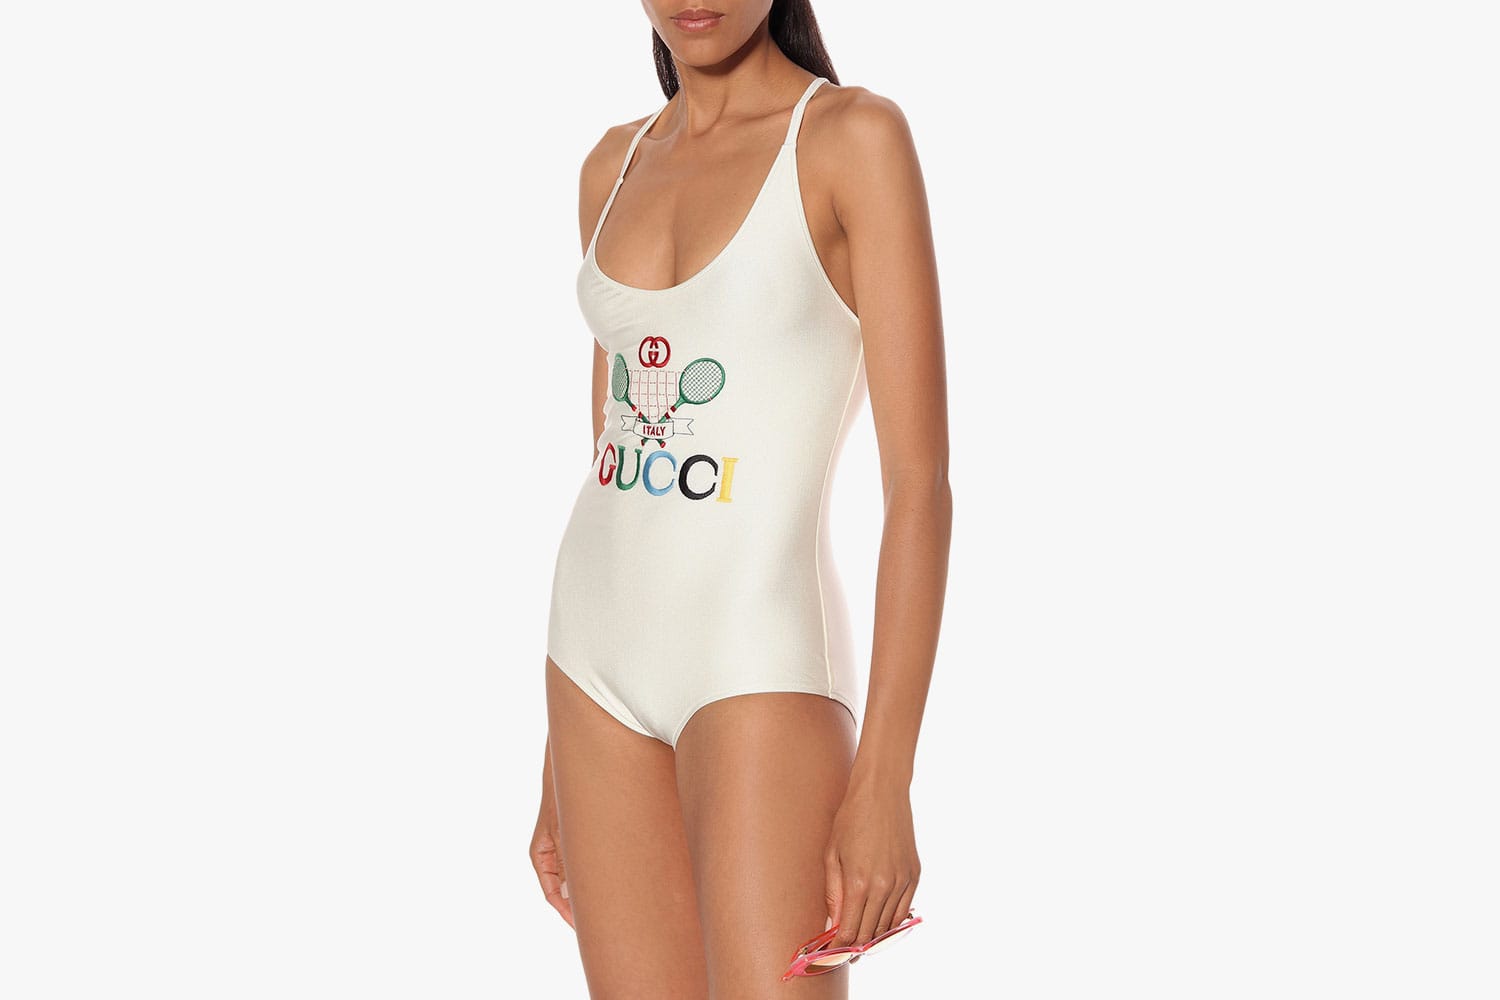 gucci one piece swimsuit